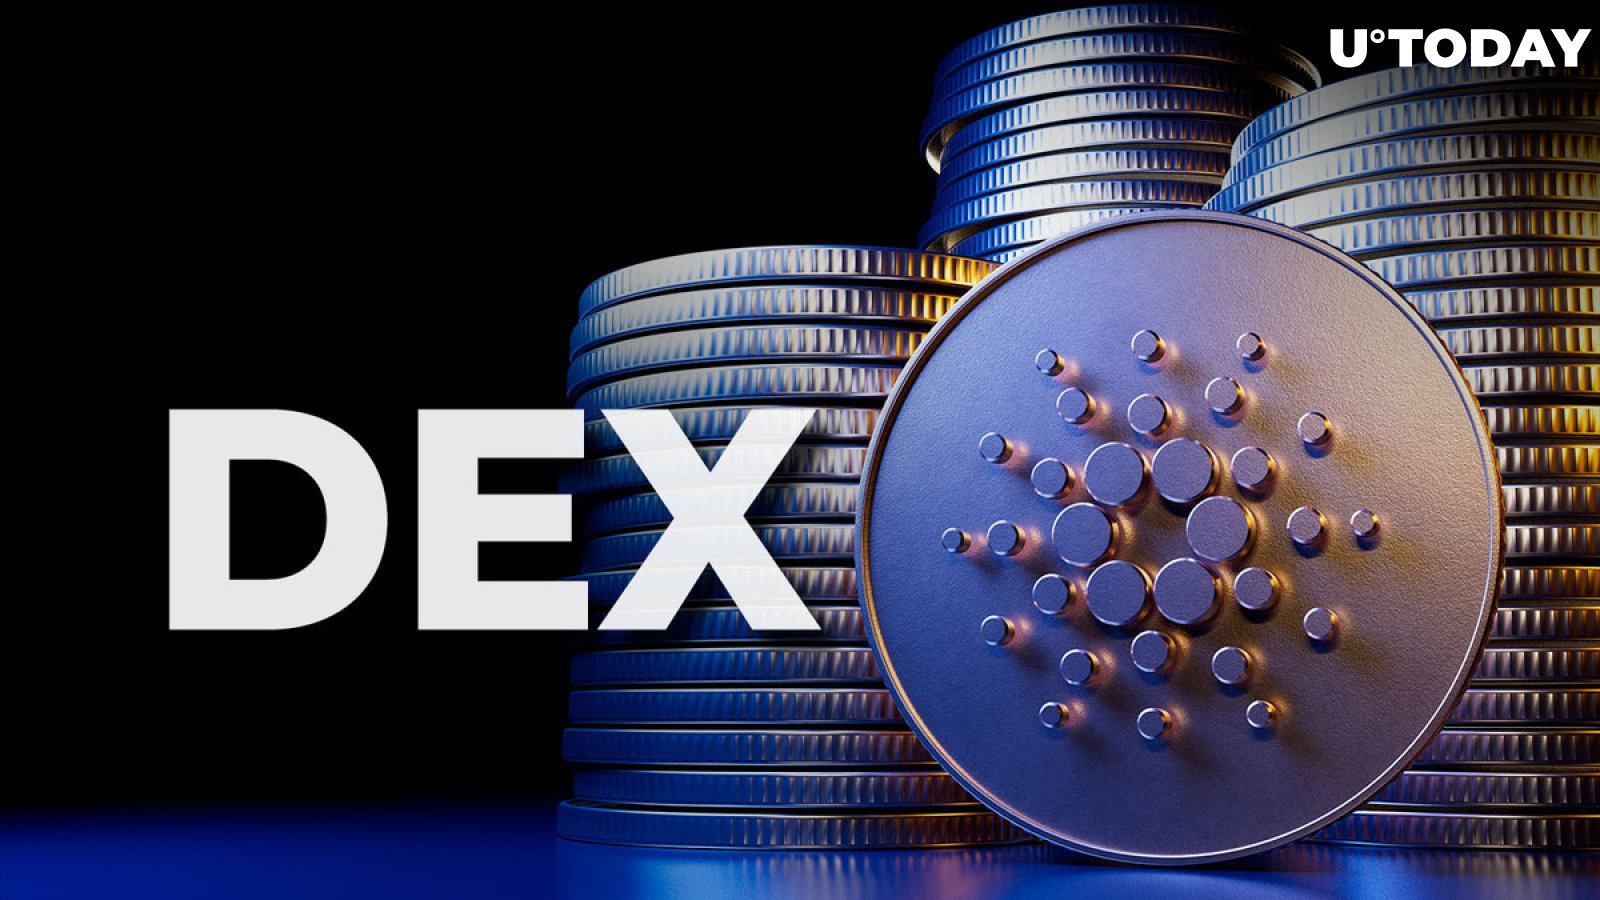 Cardano-Based DEX Performs Swaps In Minutes Now